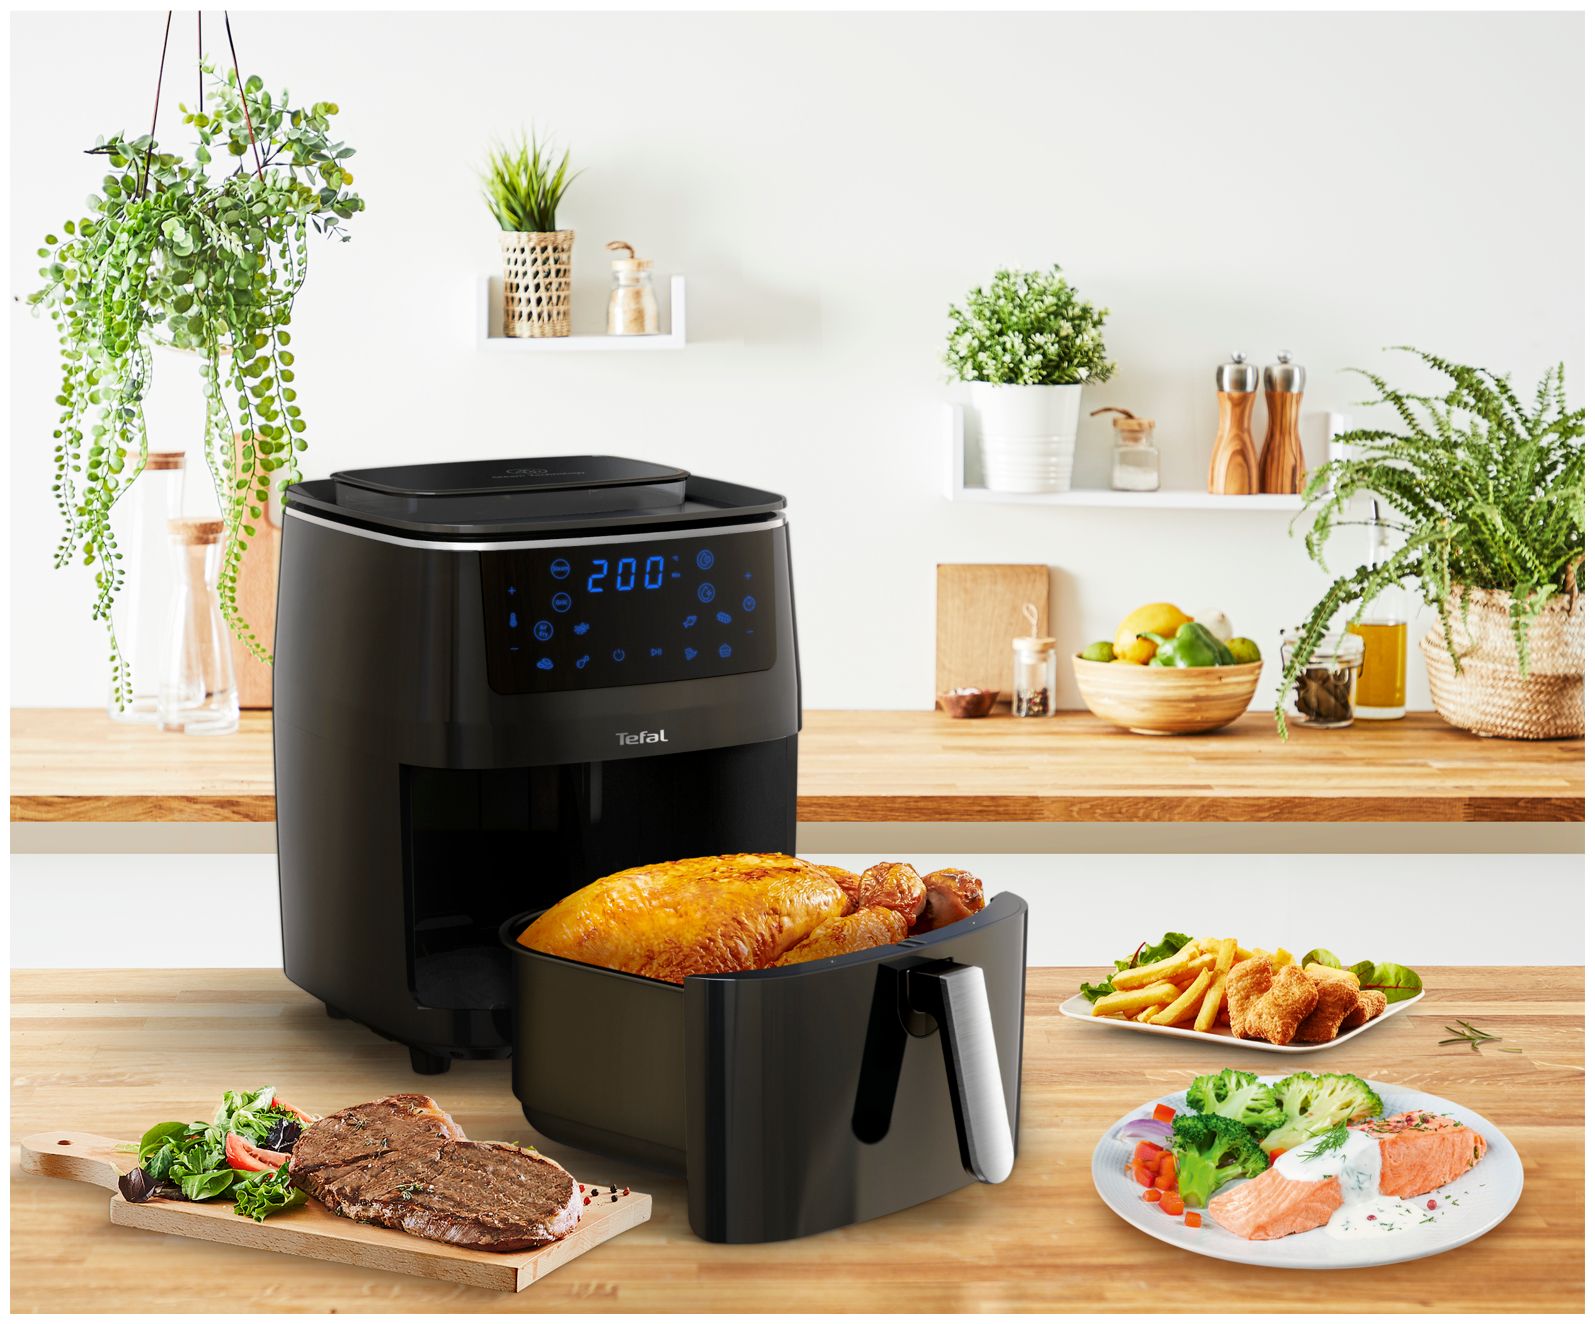 Boomstore FW2018 & Fry Steam Heißluftfritteuse Grill Easy bei W 1700 Tefal